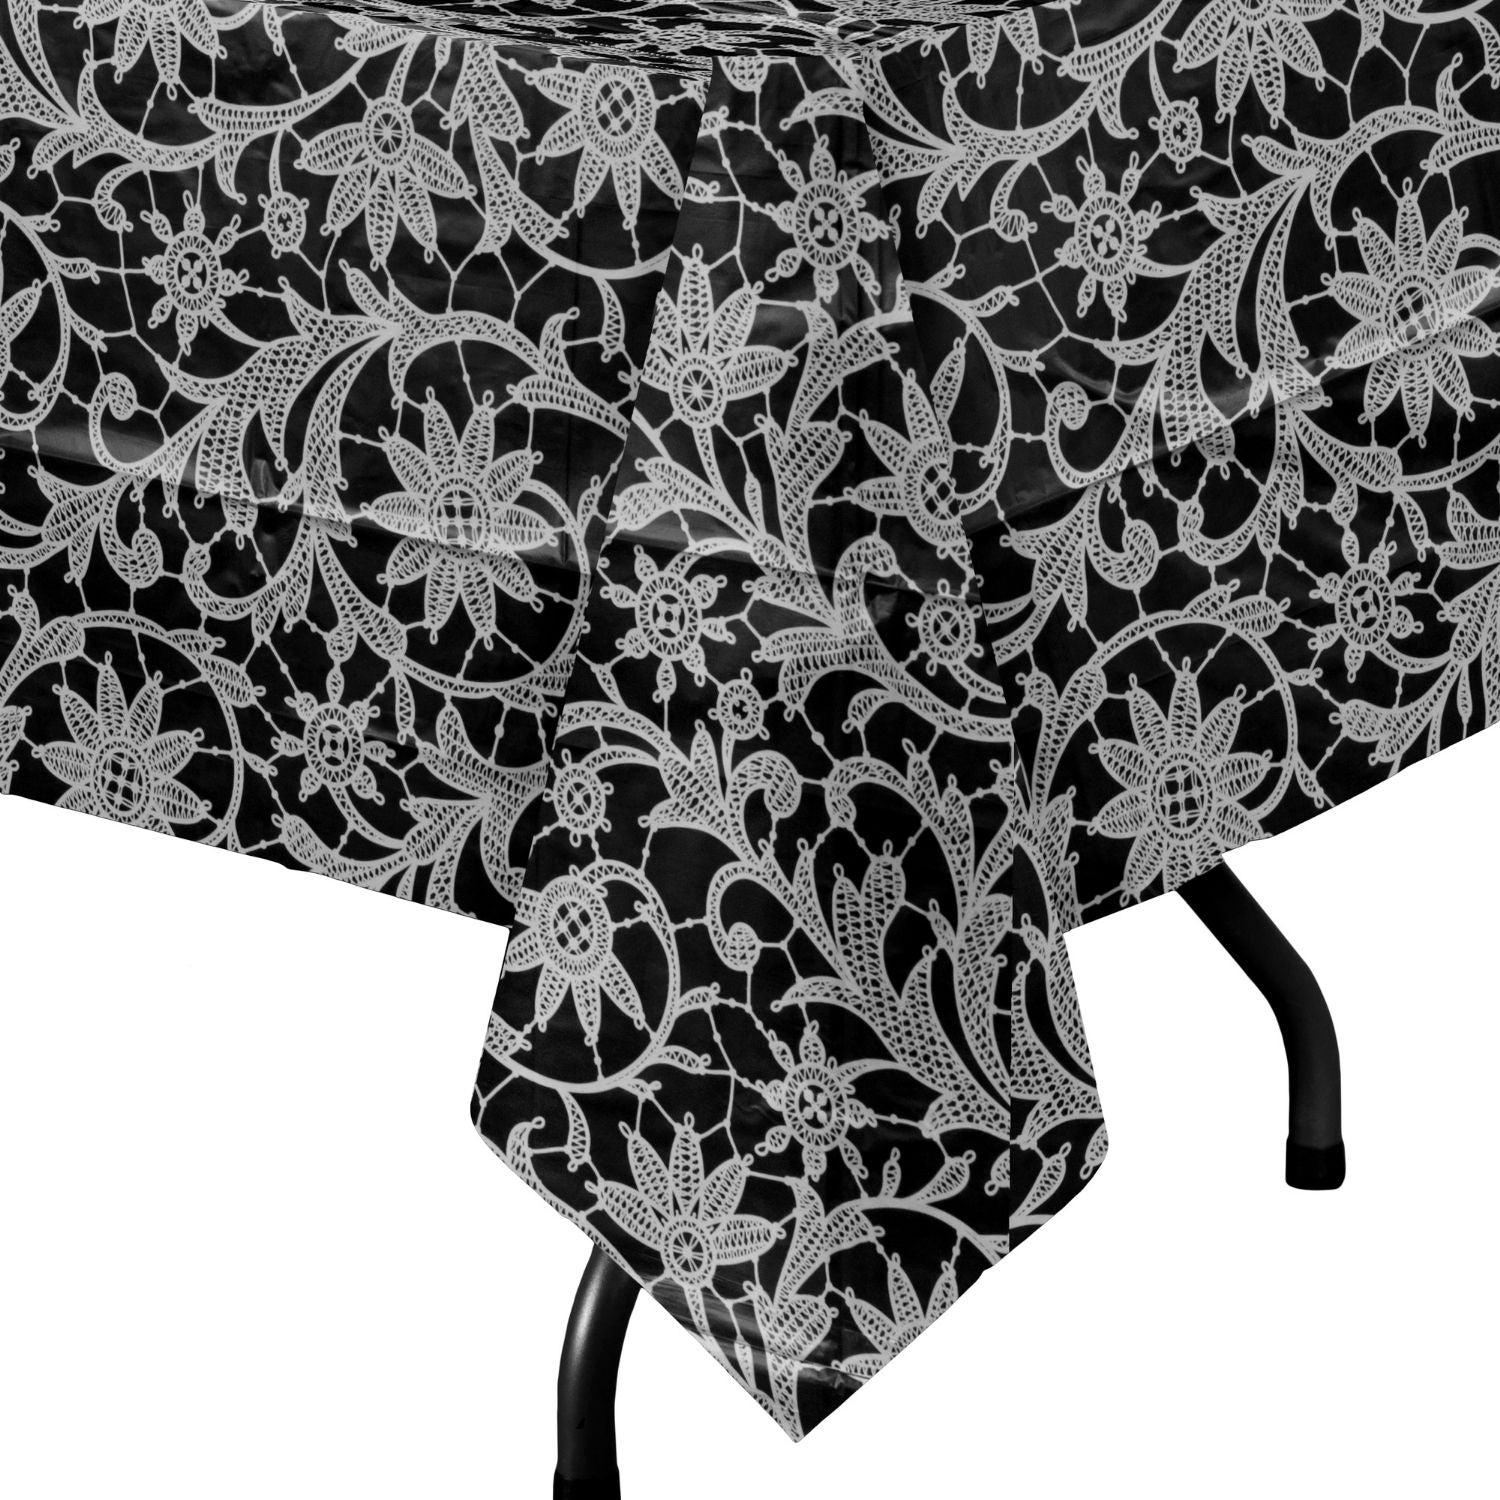 Silver Lace Printed Plastic Tablecloth | 48 Count